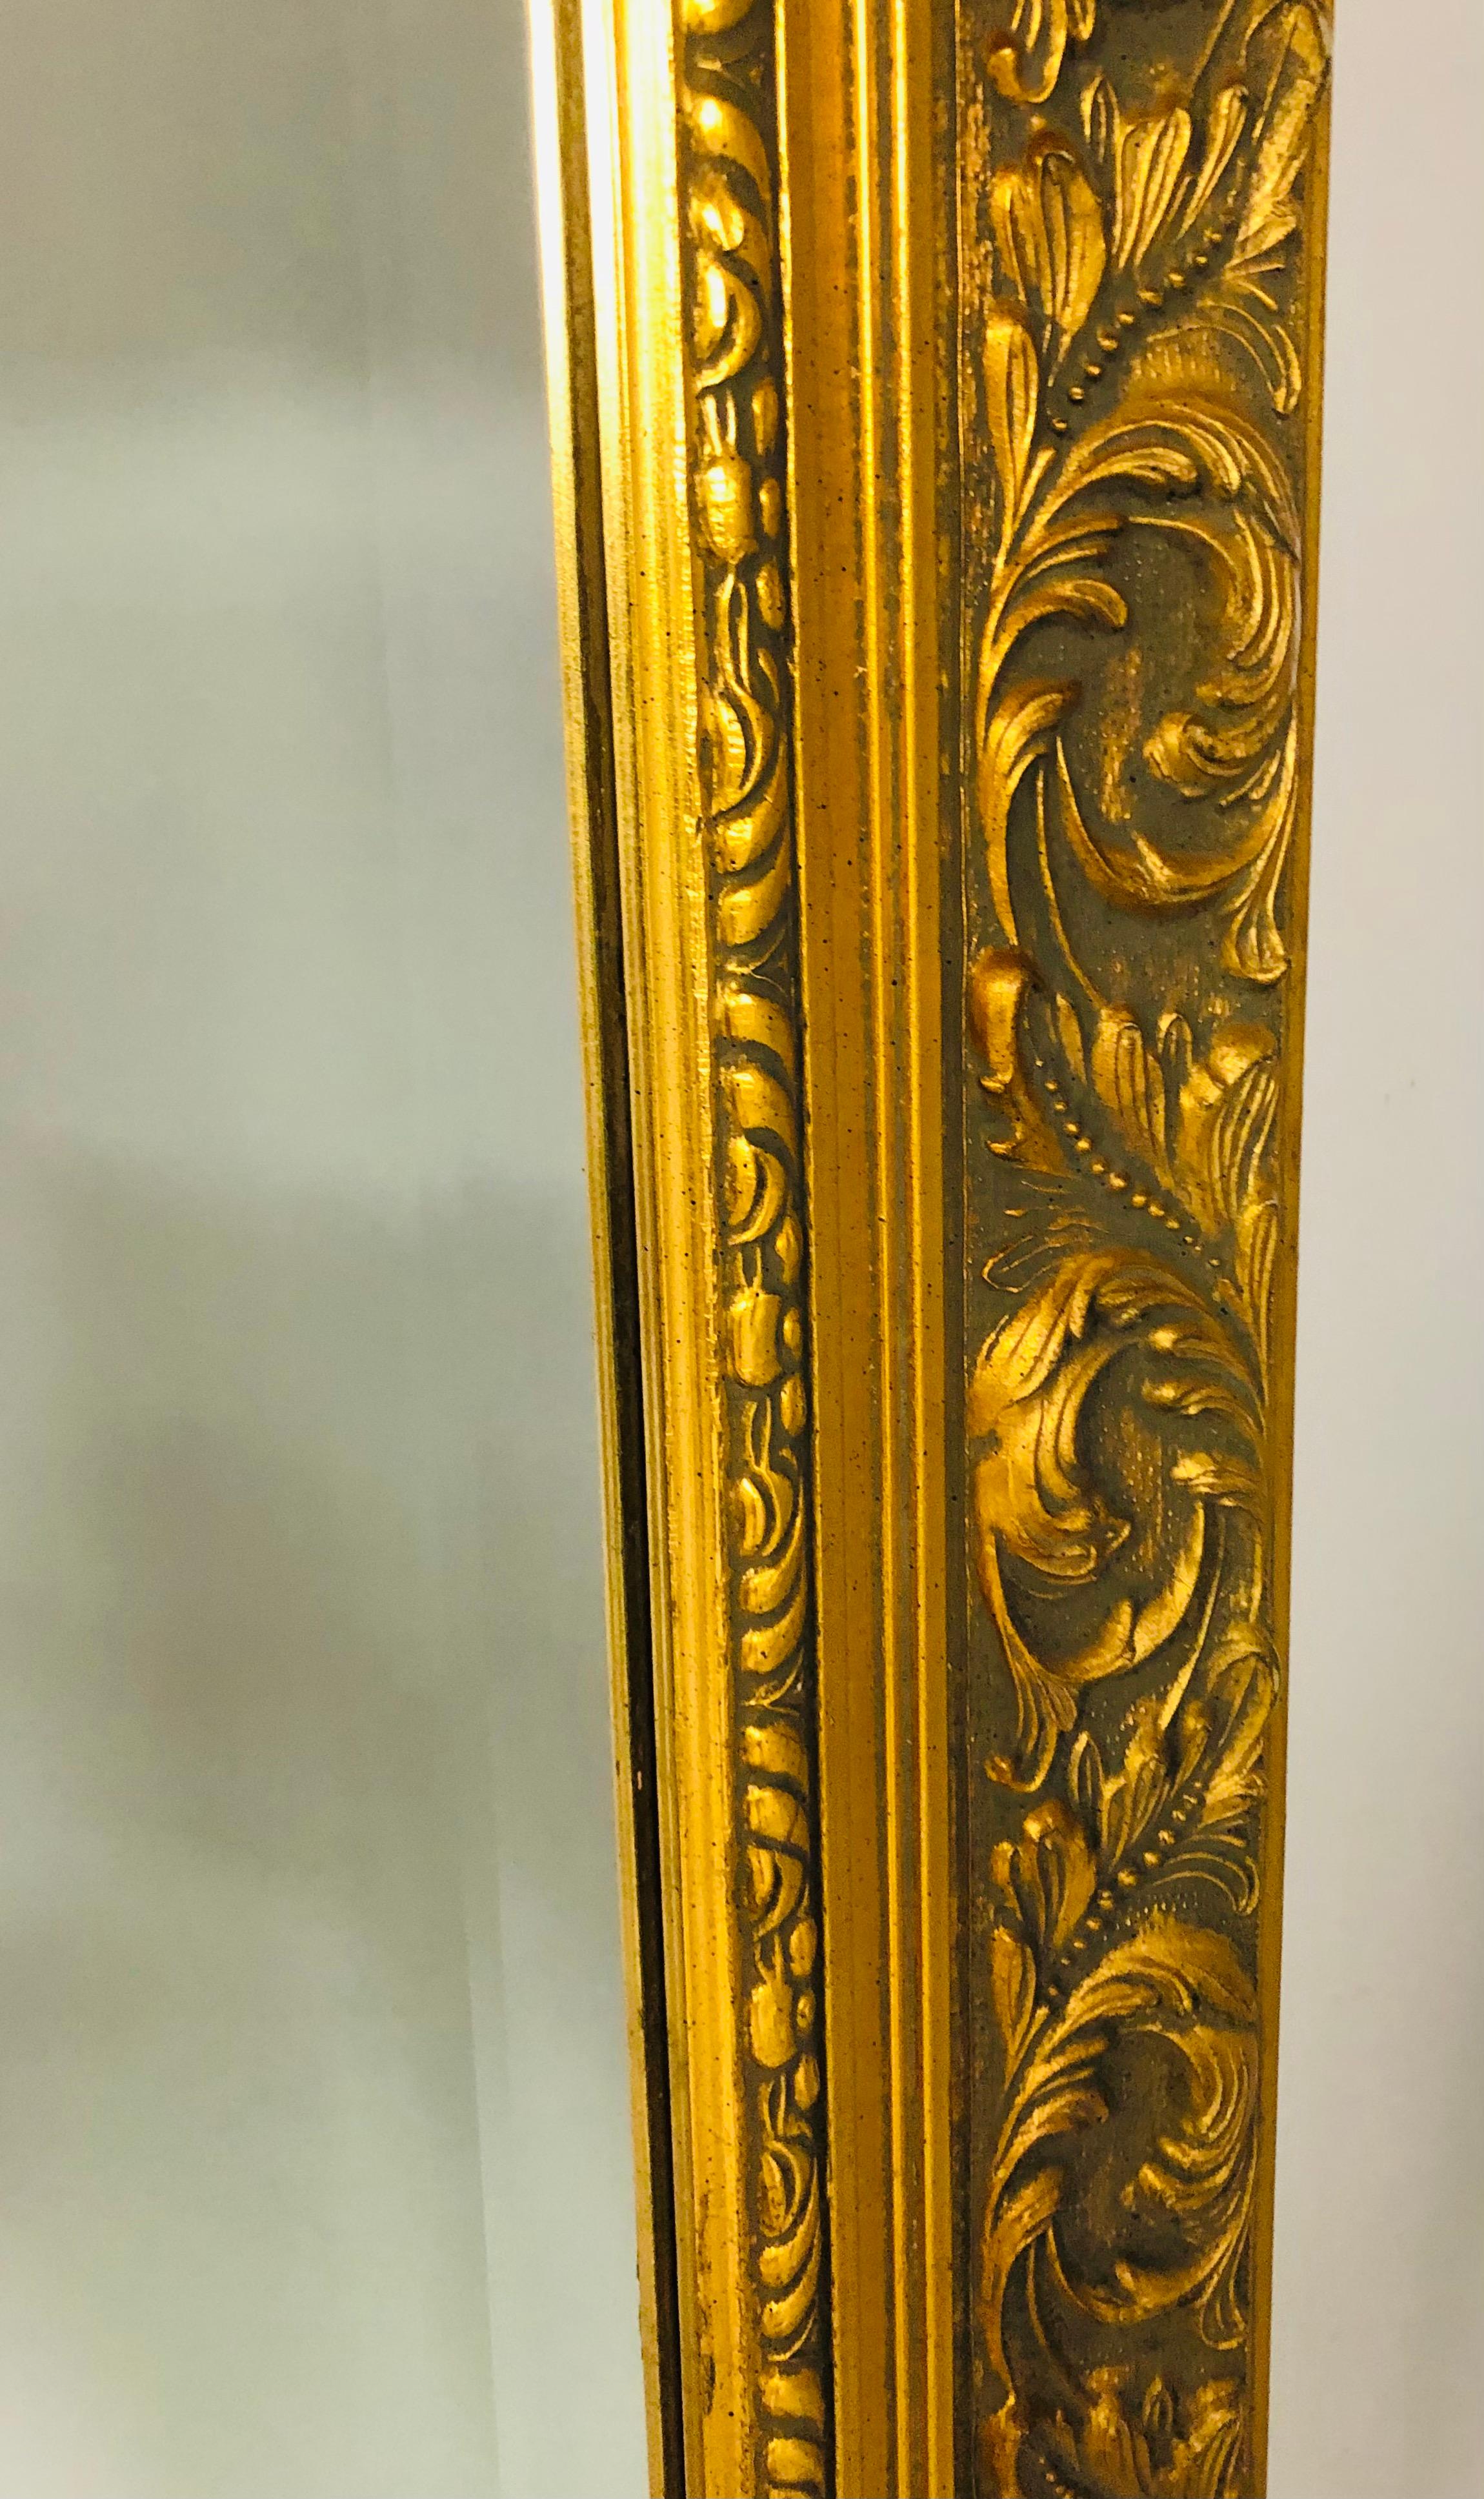 A Large vintage French Style Gilt wood mantel, pier or console large Mirror. The Frame is finely carved showing beautiful leaves pattern. The mirror glass is beveled. The mirror is sturdy and high quality. The gilt wood in good condition. 
The